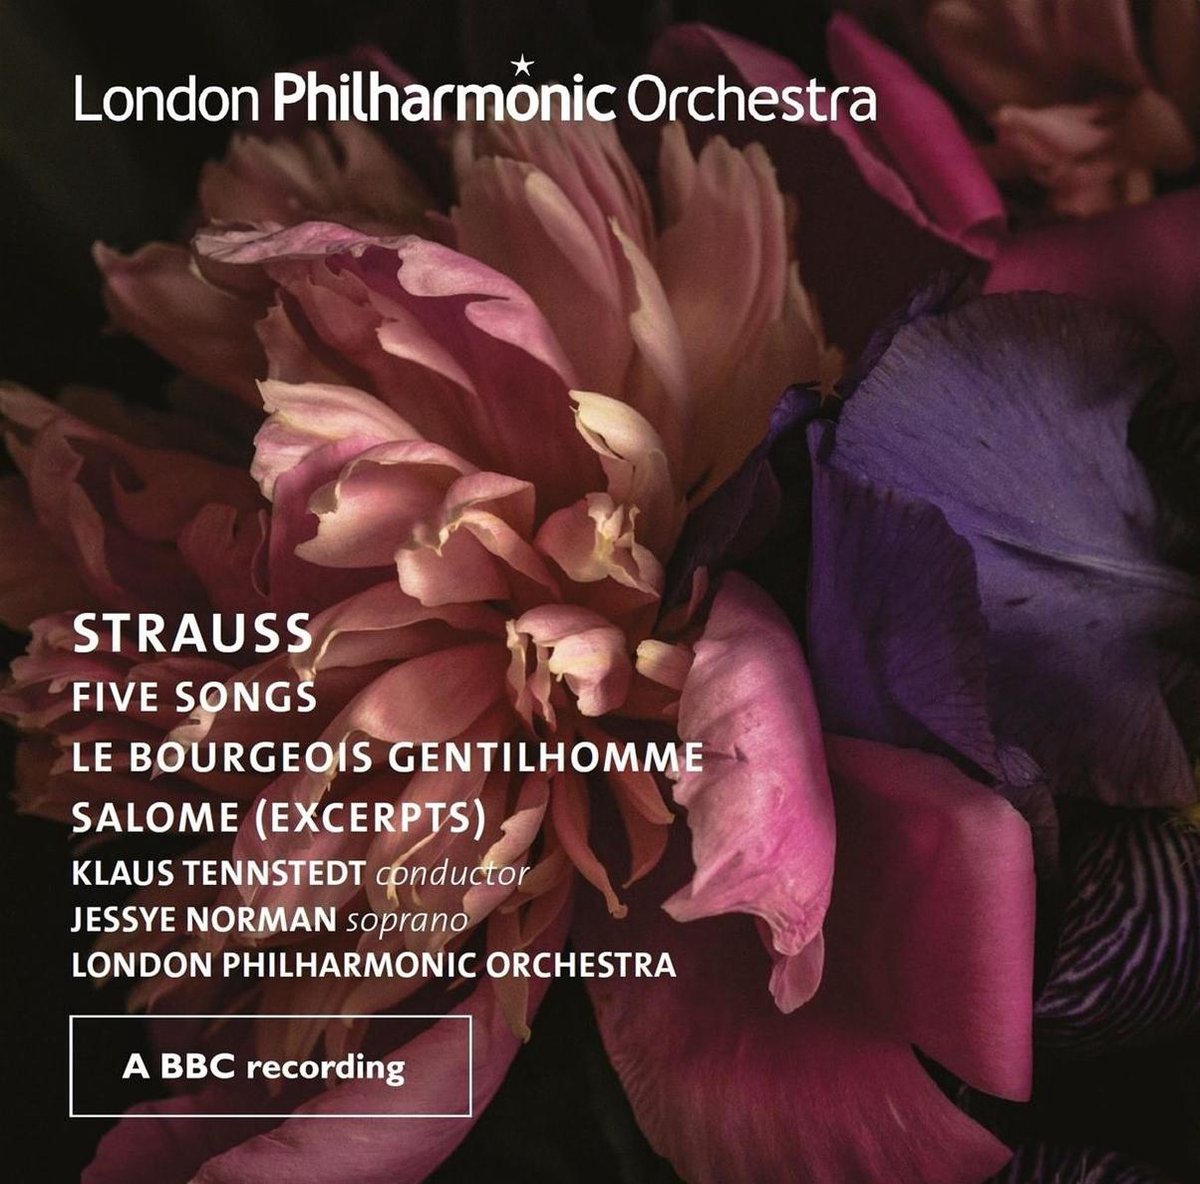 Strauss: Five Songs. Le Bourgeois Gentilhomme. Salome (excerpts) | Richard Strauss, London Philharmonic Orchestra, Klaus Tennstedt